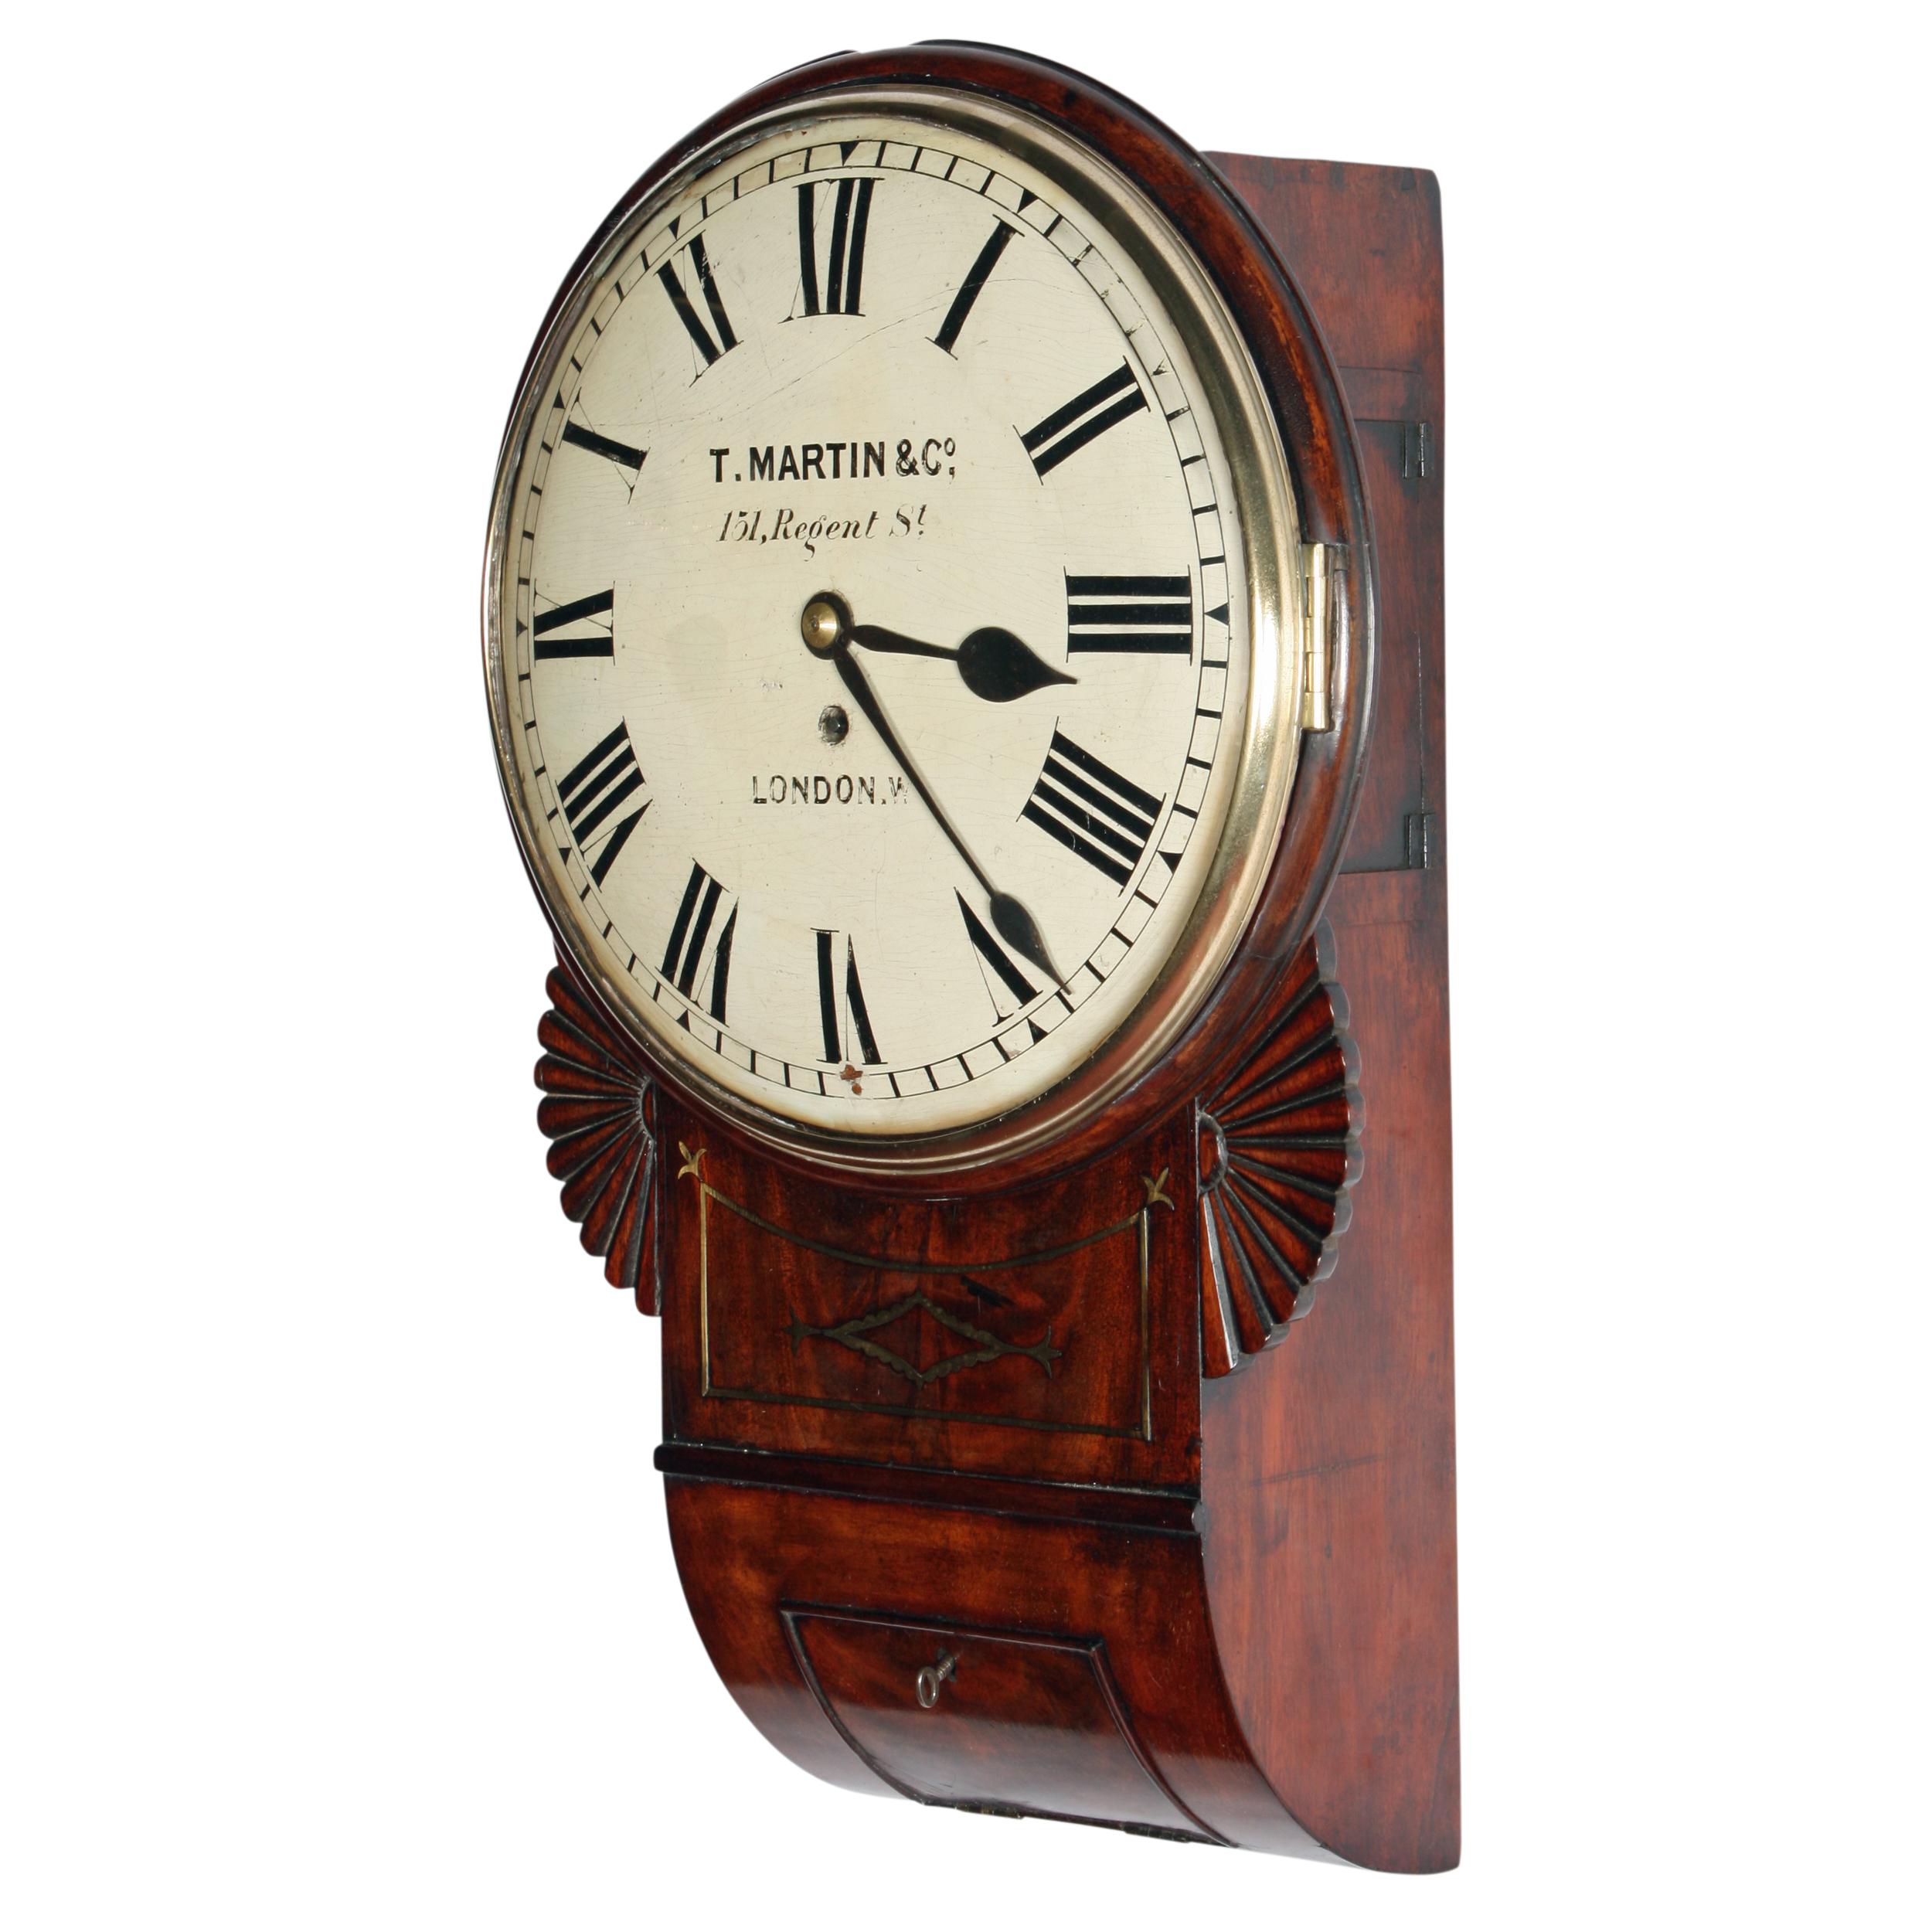 An early 19th century Regency mahogany and brass inlaid drop case fuse works wall clock.

The clock has a domed dial with Roman numerals and a domed glass held in a brass bevel.

The works are an eight day fusee movement with a brass pendulum